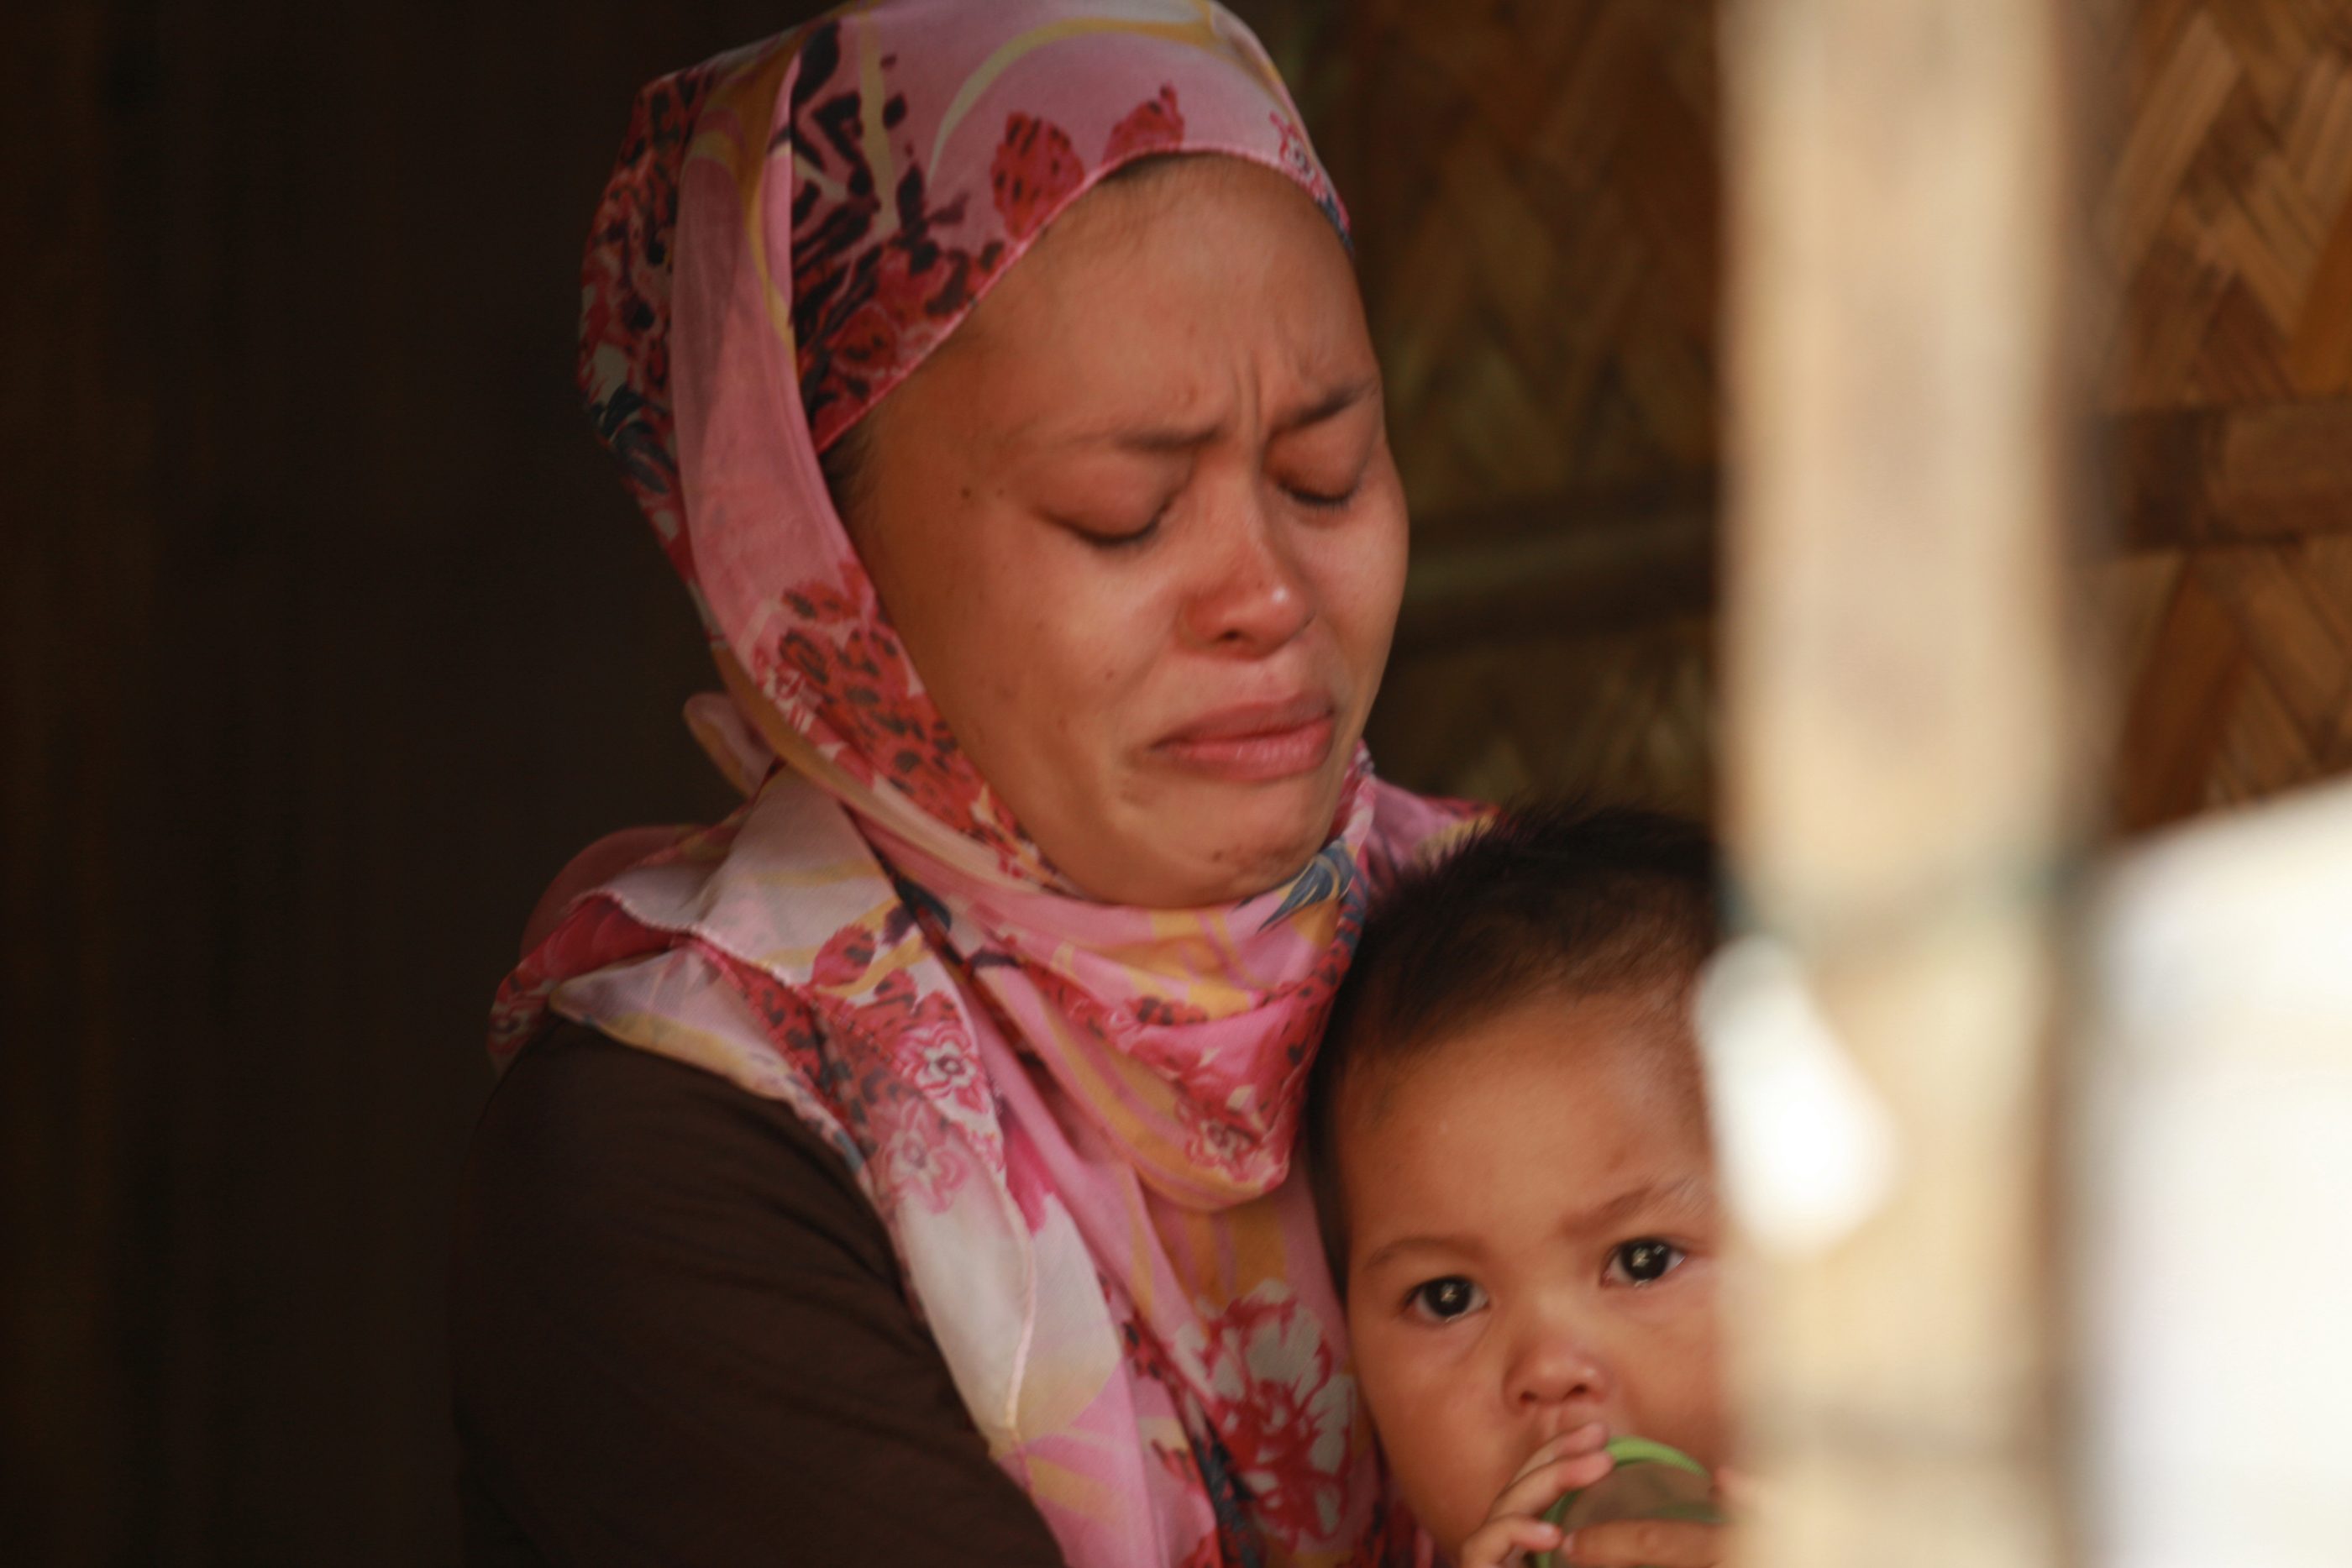 STILL GRIEVING. Fatima Sandigan, 39, cries as she remembers her last moments with her husband, Mamarizah. He was one of the MILF fighters who died on January 25, 2015, leaving behind Fatima and their 3 children. 